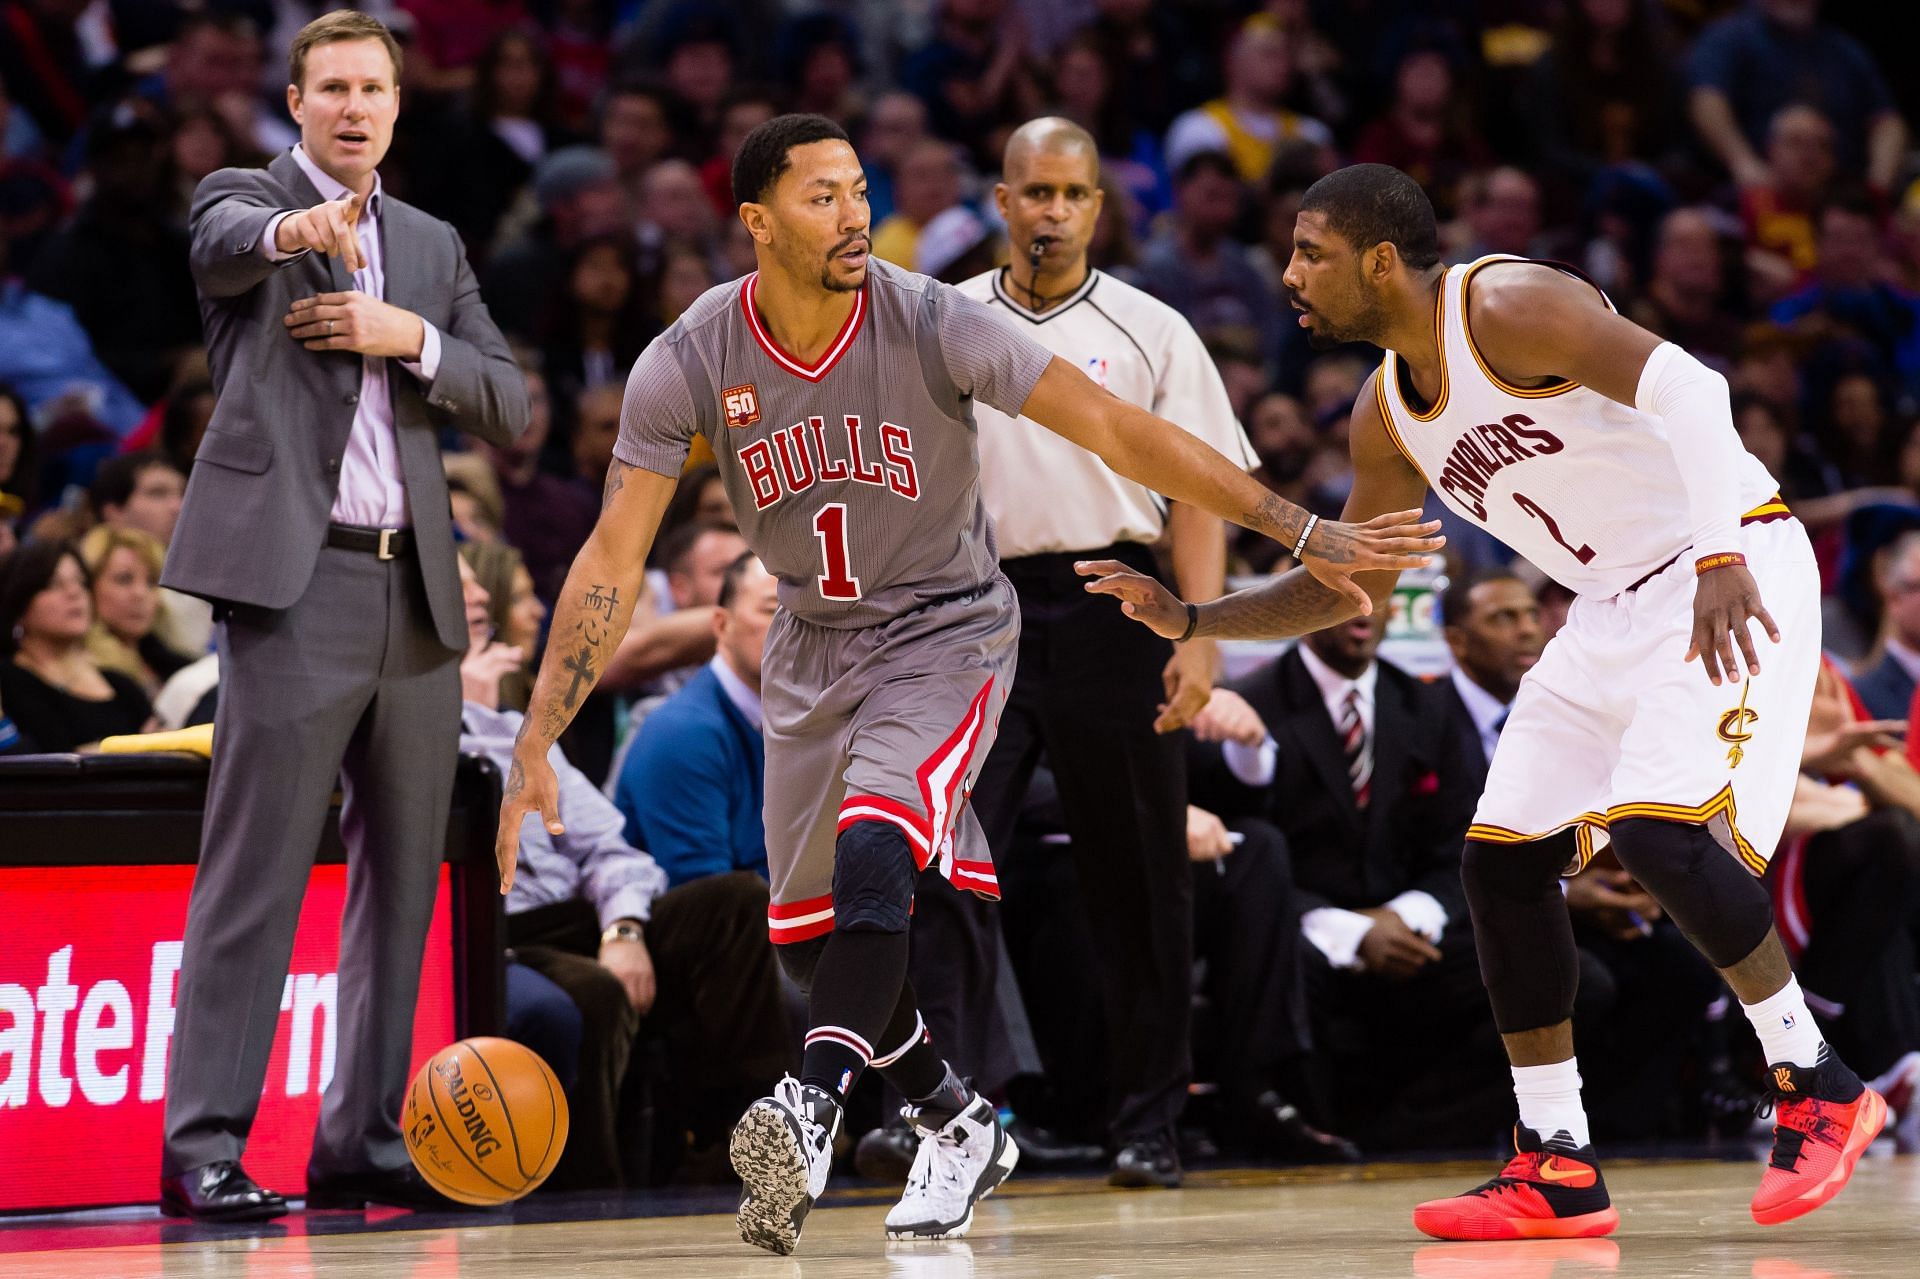 Derrick Rose (#1) of the Chicago Bulls drives around Kyrie Irving (#2) of the Cleveland Cavaliers